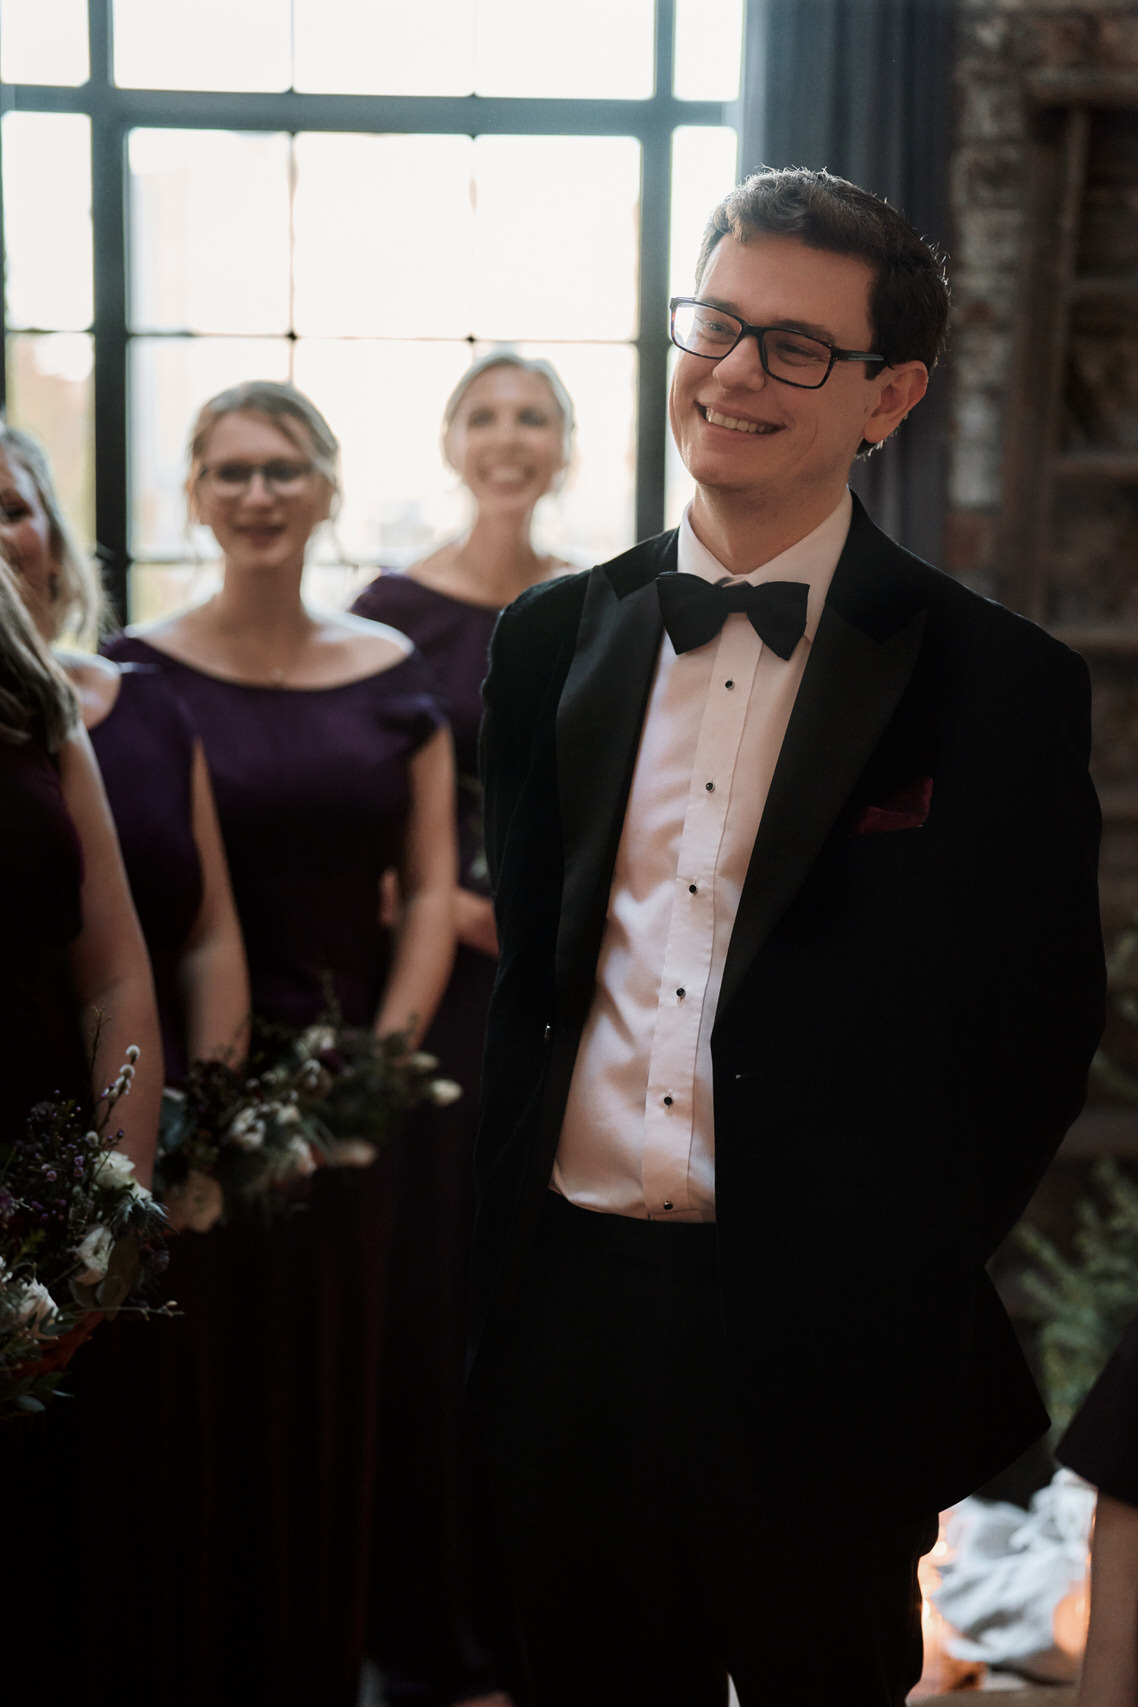 A guy in a suit is grinning at his bride's friends.